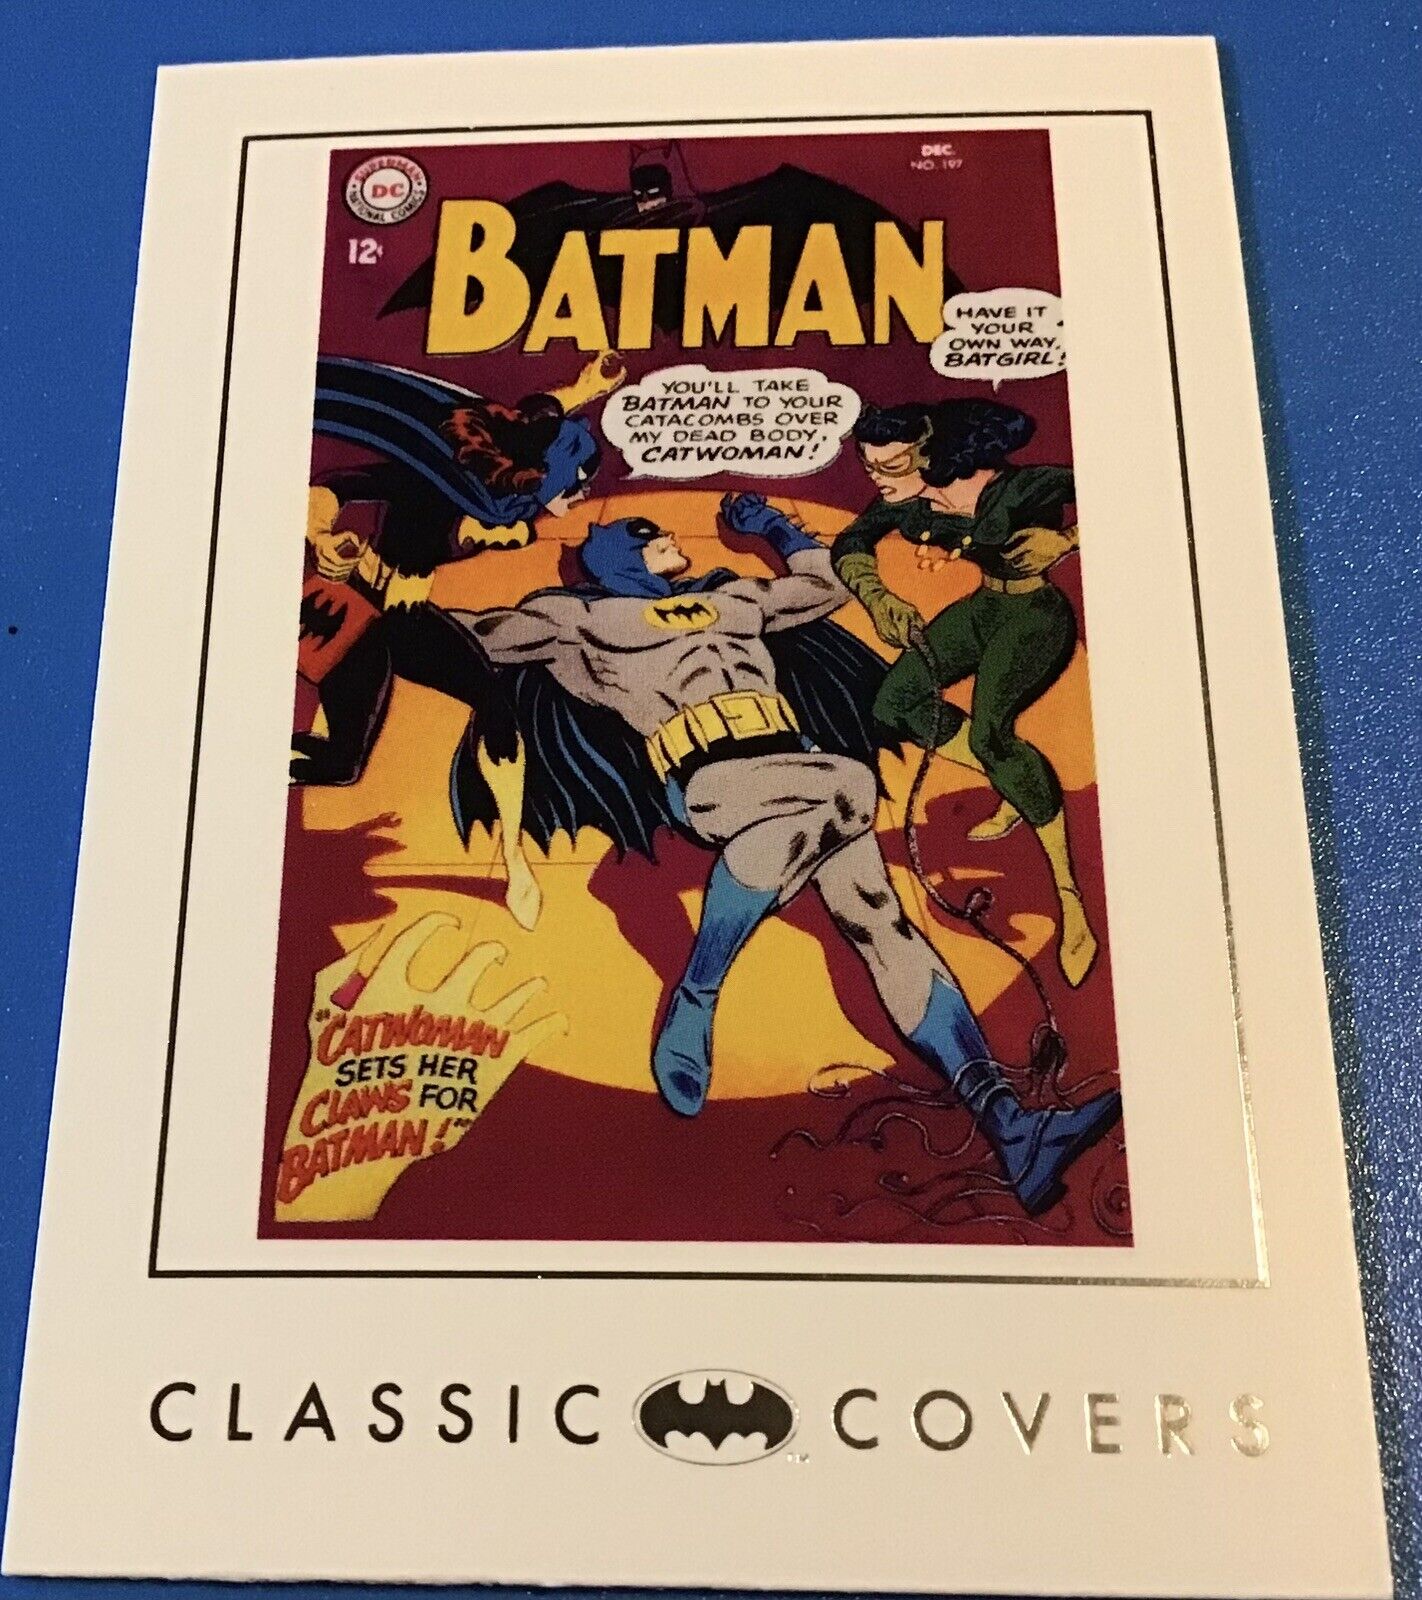 2008 BATMAN ARCHIVES CLASSIC COVERS BASE CARD #24 issue 197 first published 1967